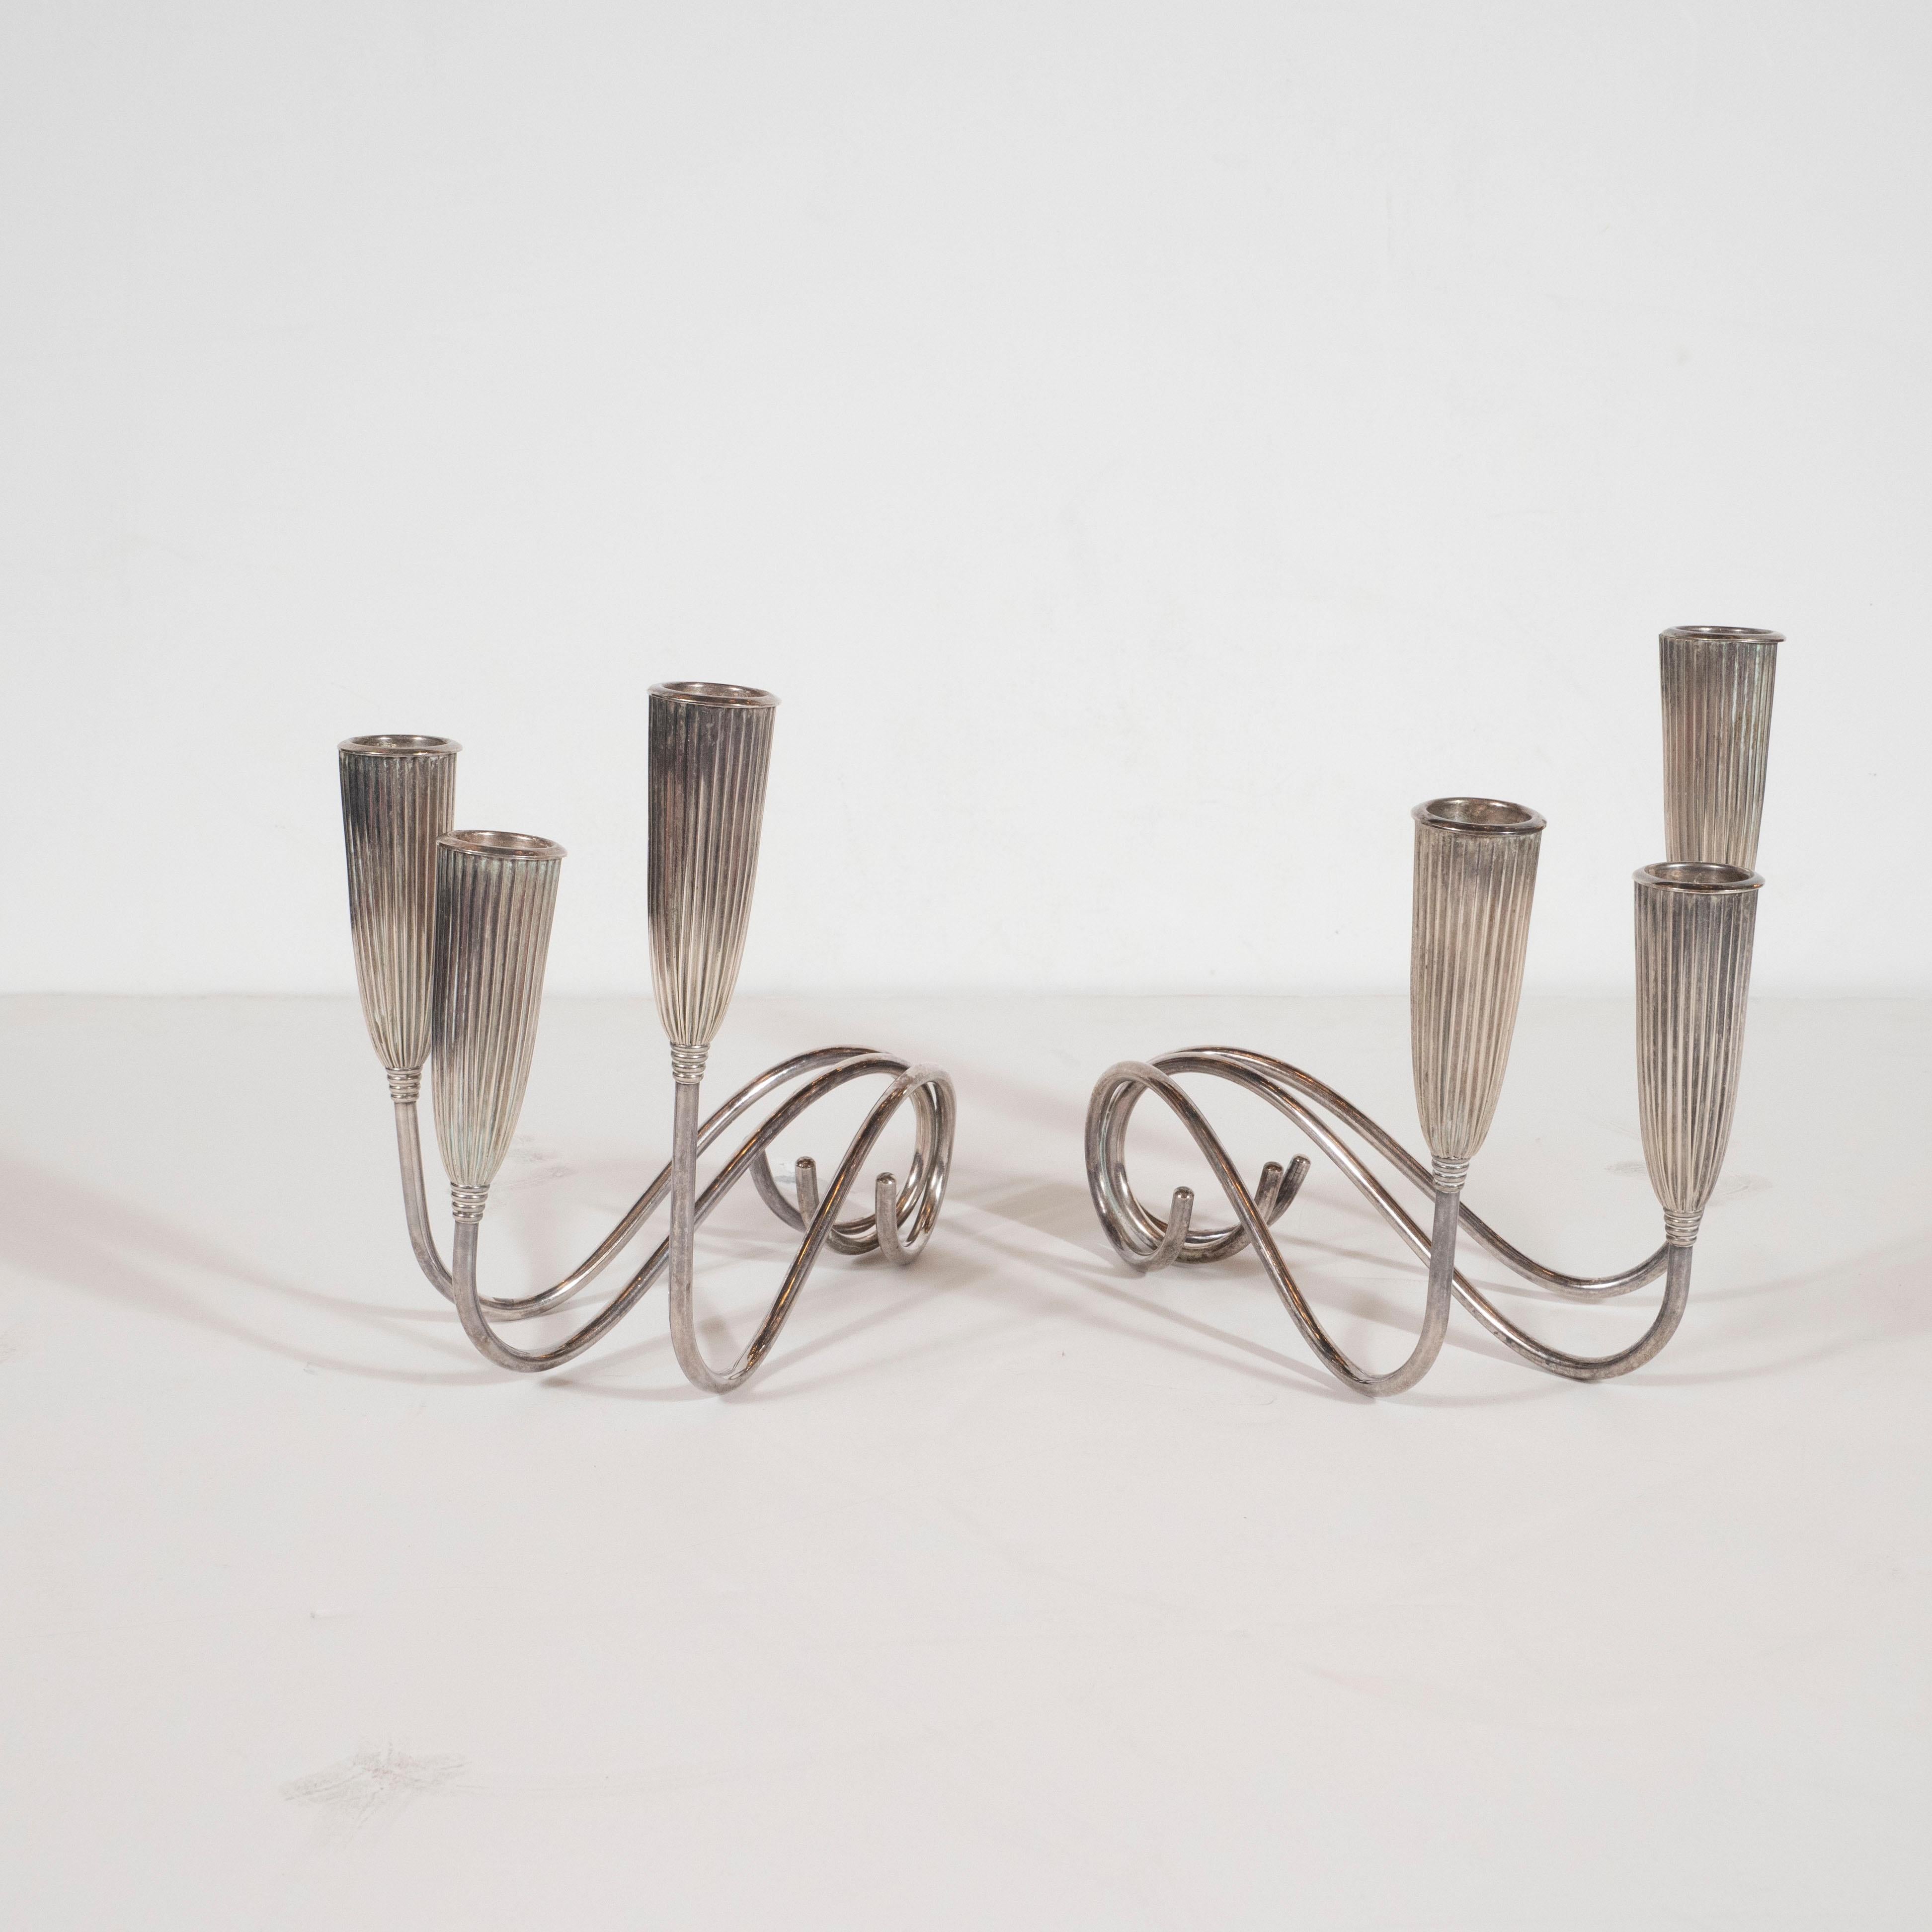 This elegant and graphic pair of silver plated triple branch candlesticks were realized by the celebrated design firm Napier Co., in the United States, circa 1940. Each features three undulating arms that culminate in fluted bullet form supports.